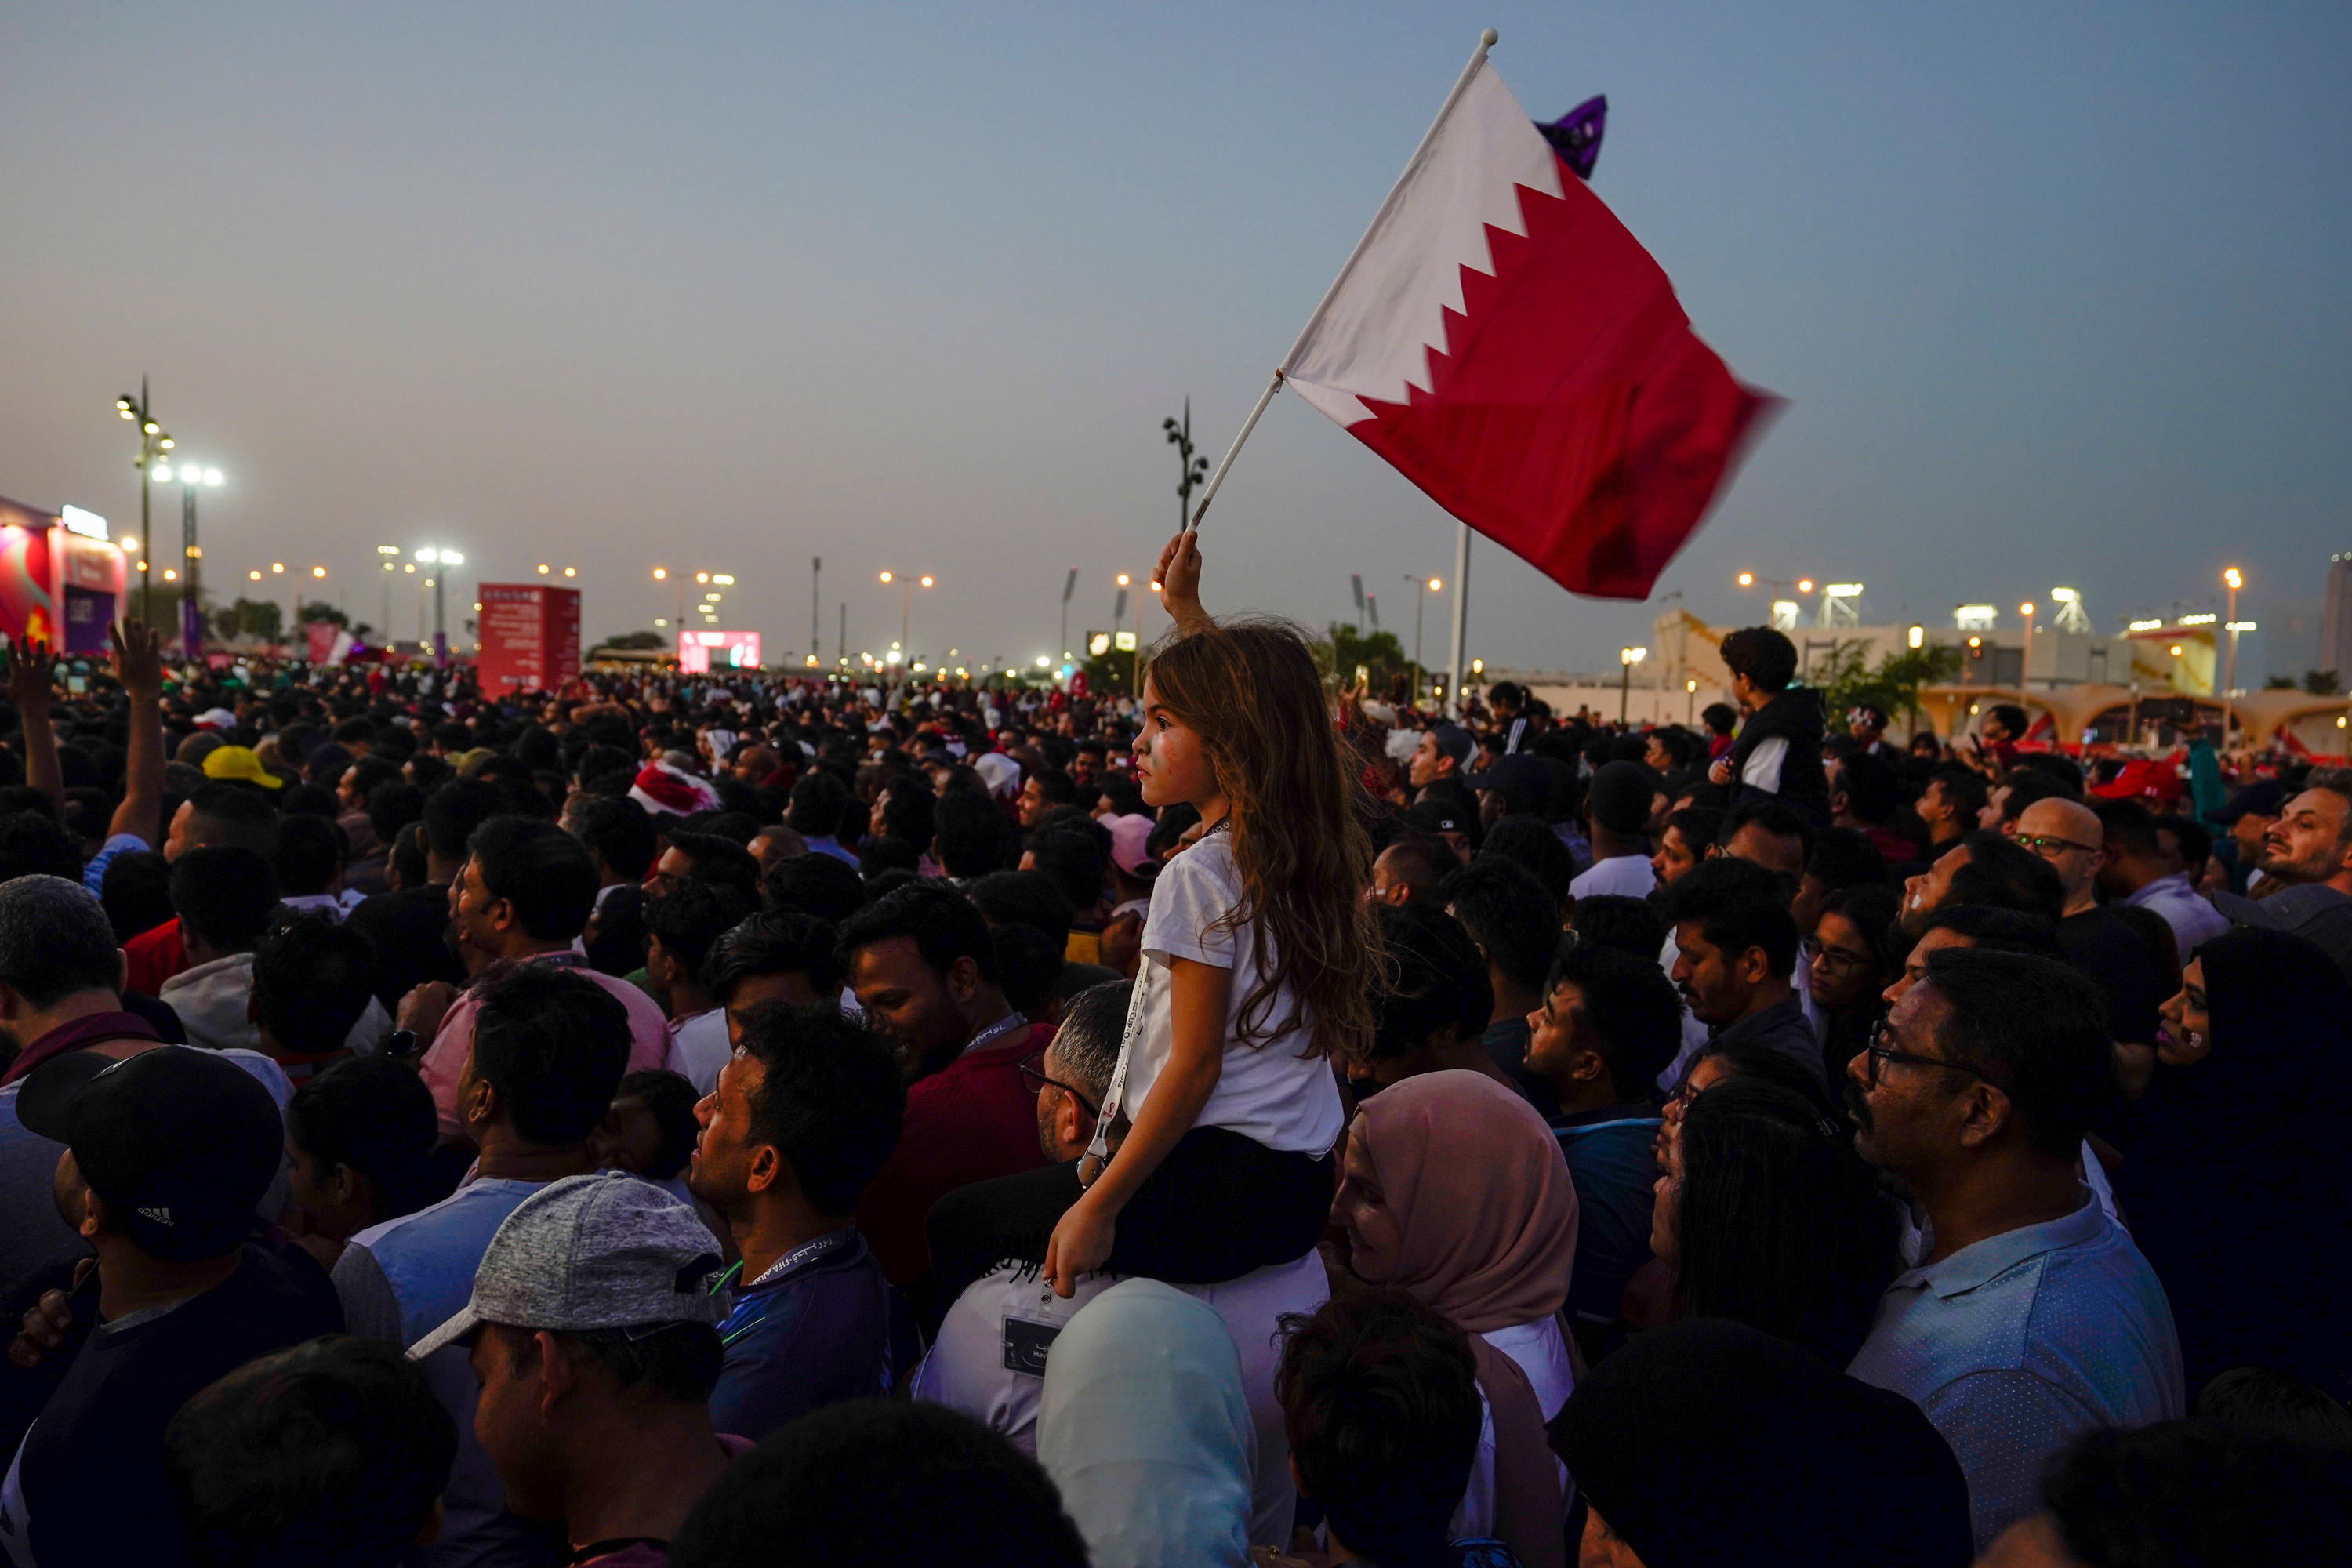 A girl waves a Qatari flag during the opening ceremony for the World Cup prior to the match between Qatar and Ecuador, in Doha, Qatar on November 20.